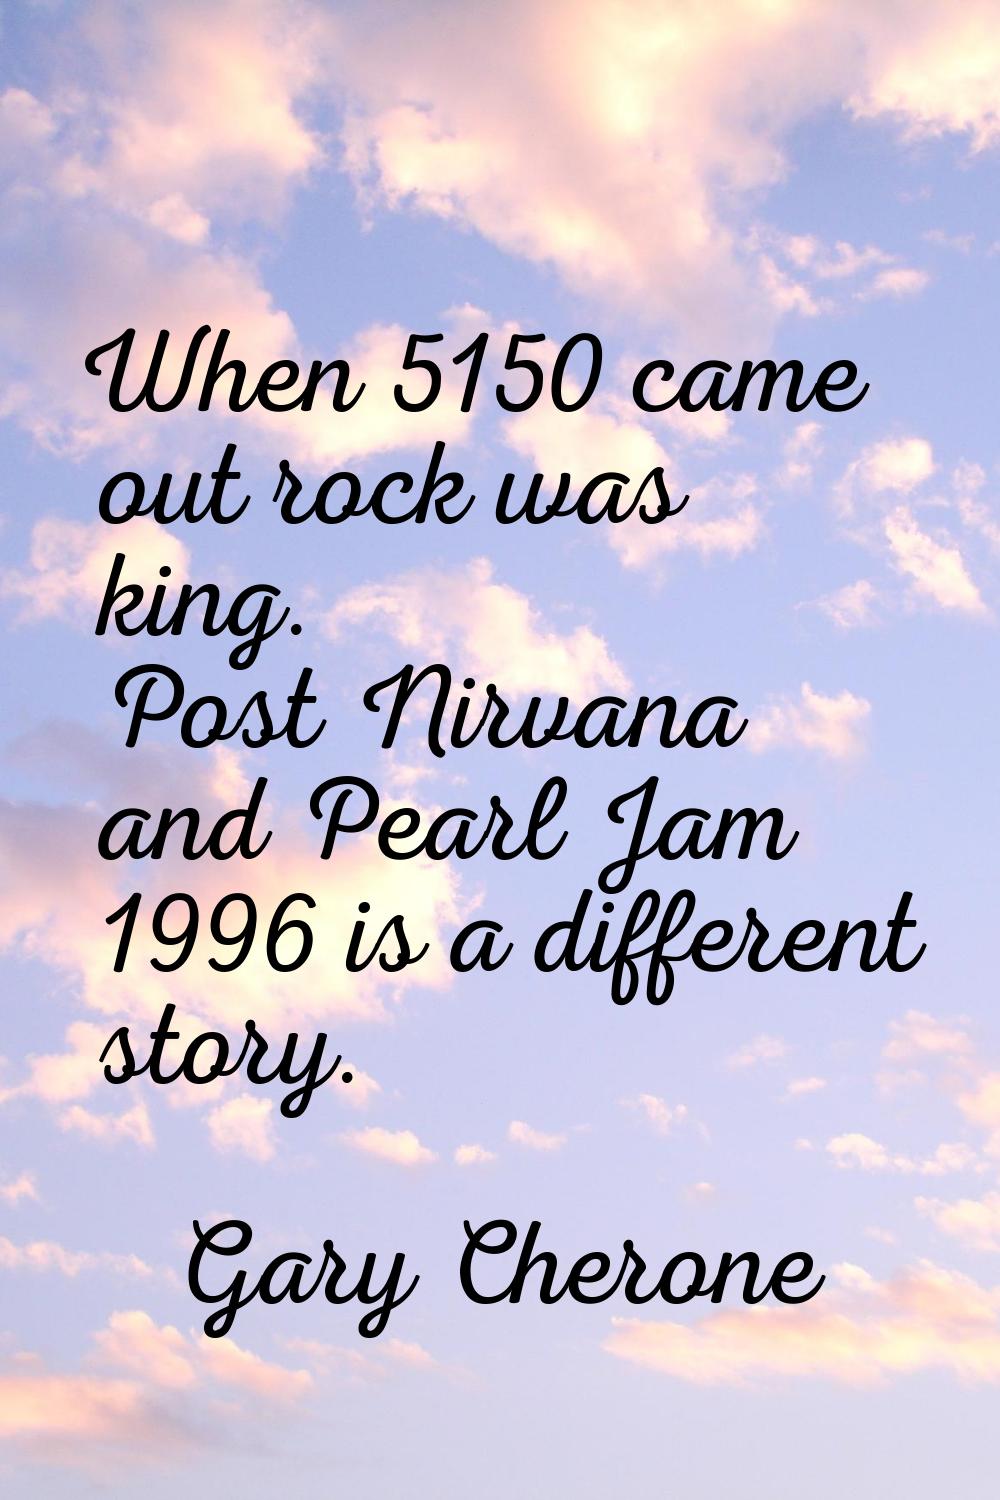 When 5150 came out rock was king. Post Nirvana and Pearl Jam 1996 is a different story.